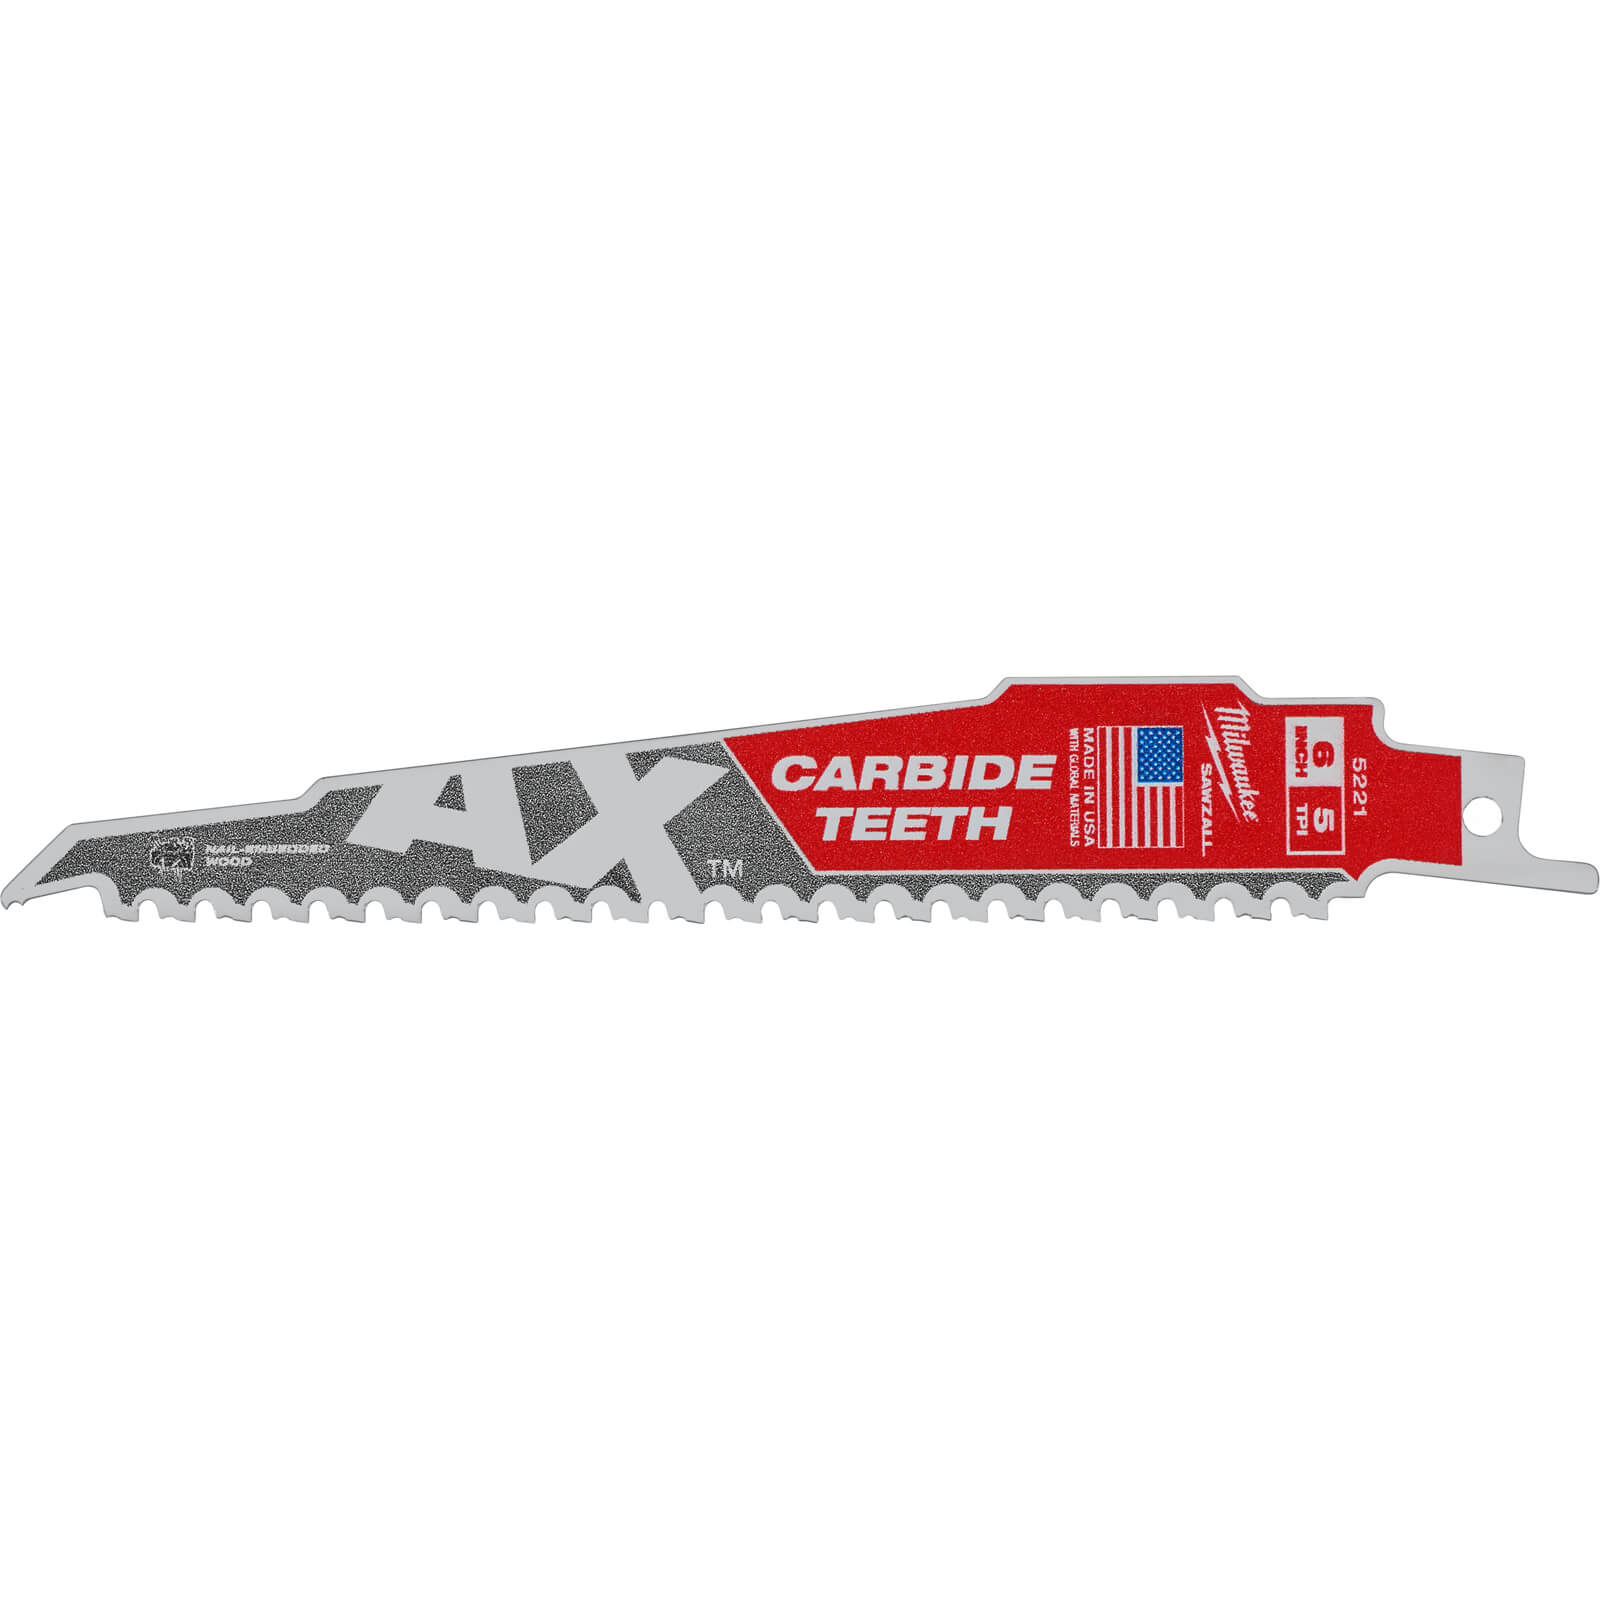 Image of Milwaukee Heavy Duty AX Carbide Demolition Reciprocating Sabre Saw Blades 150mm Pack of 1